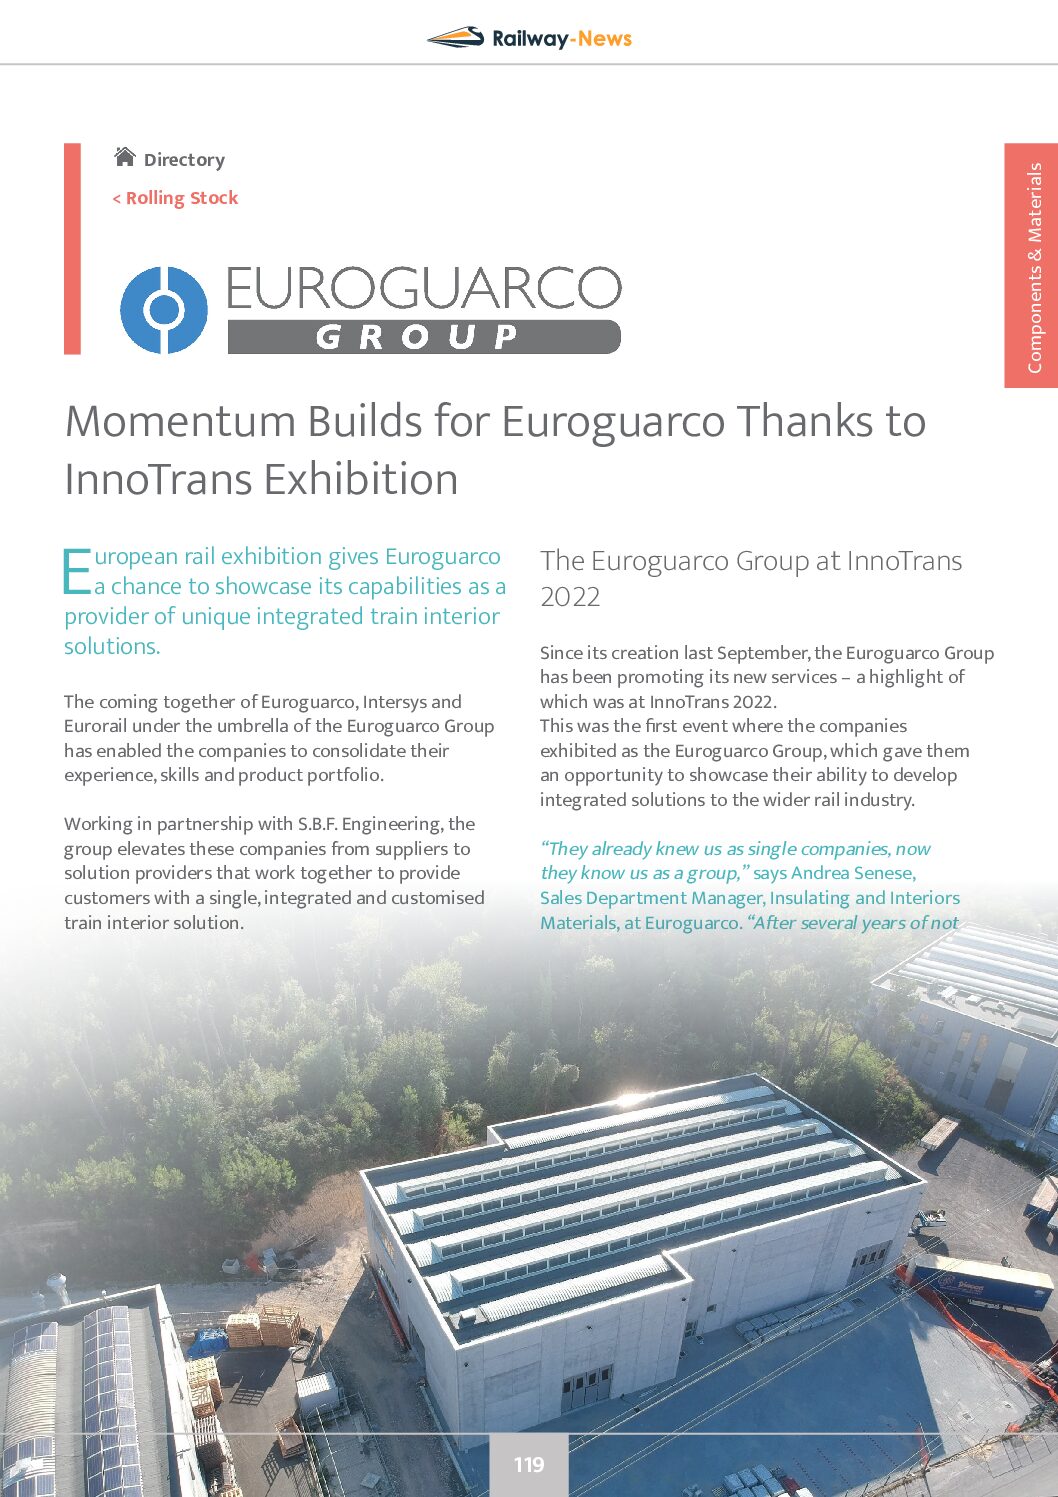 Momentum Builds for Euroguarco Thanks to InnoTrans Exhibition